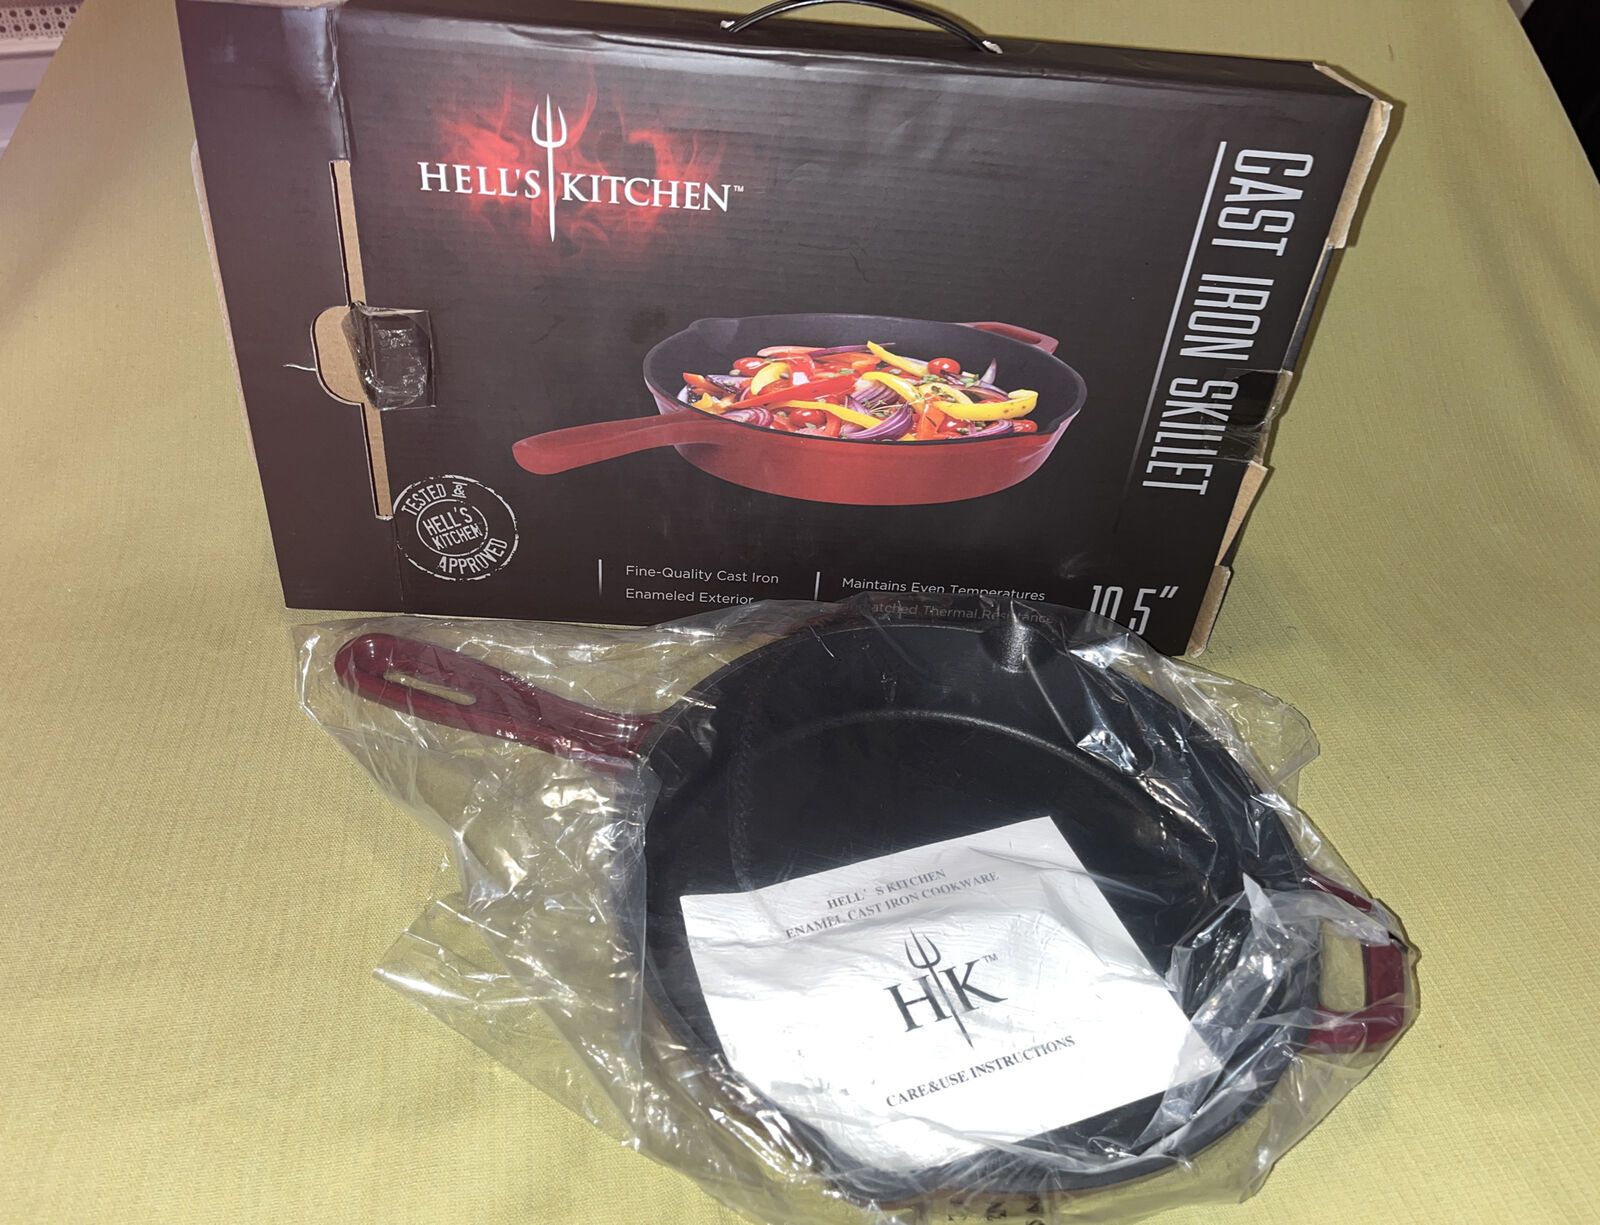 Hell’s Kitchen Cast Iron Skillet 10.5” Red Enameled Exterior Pan NIB